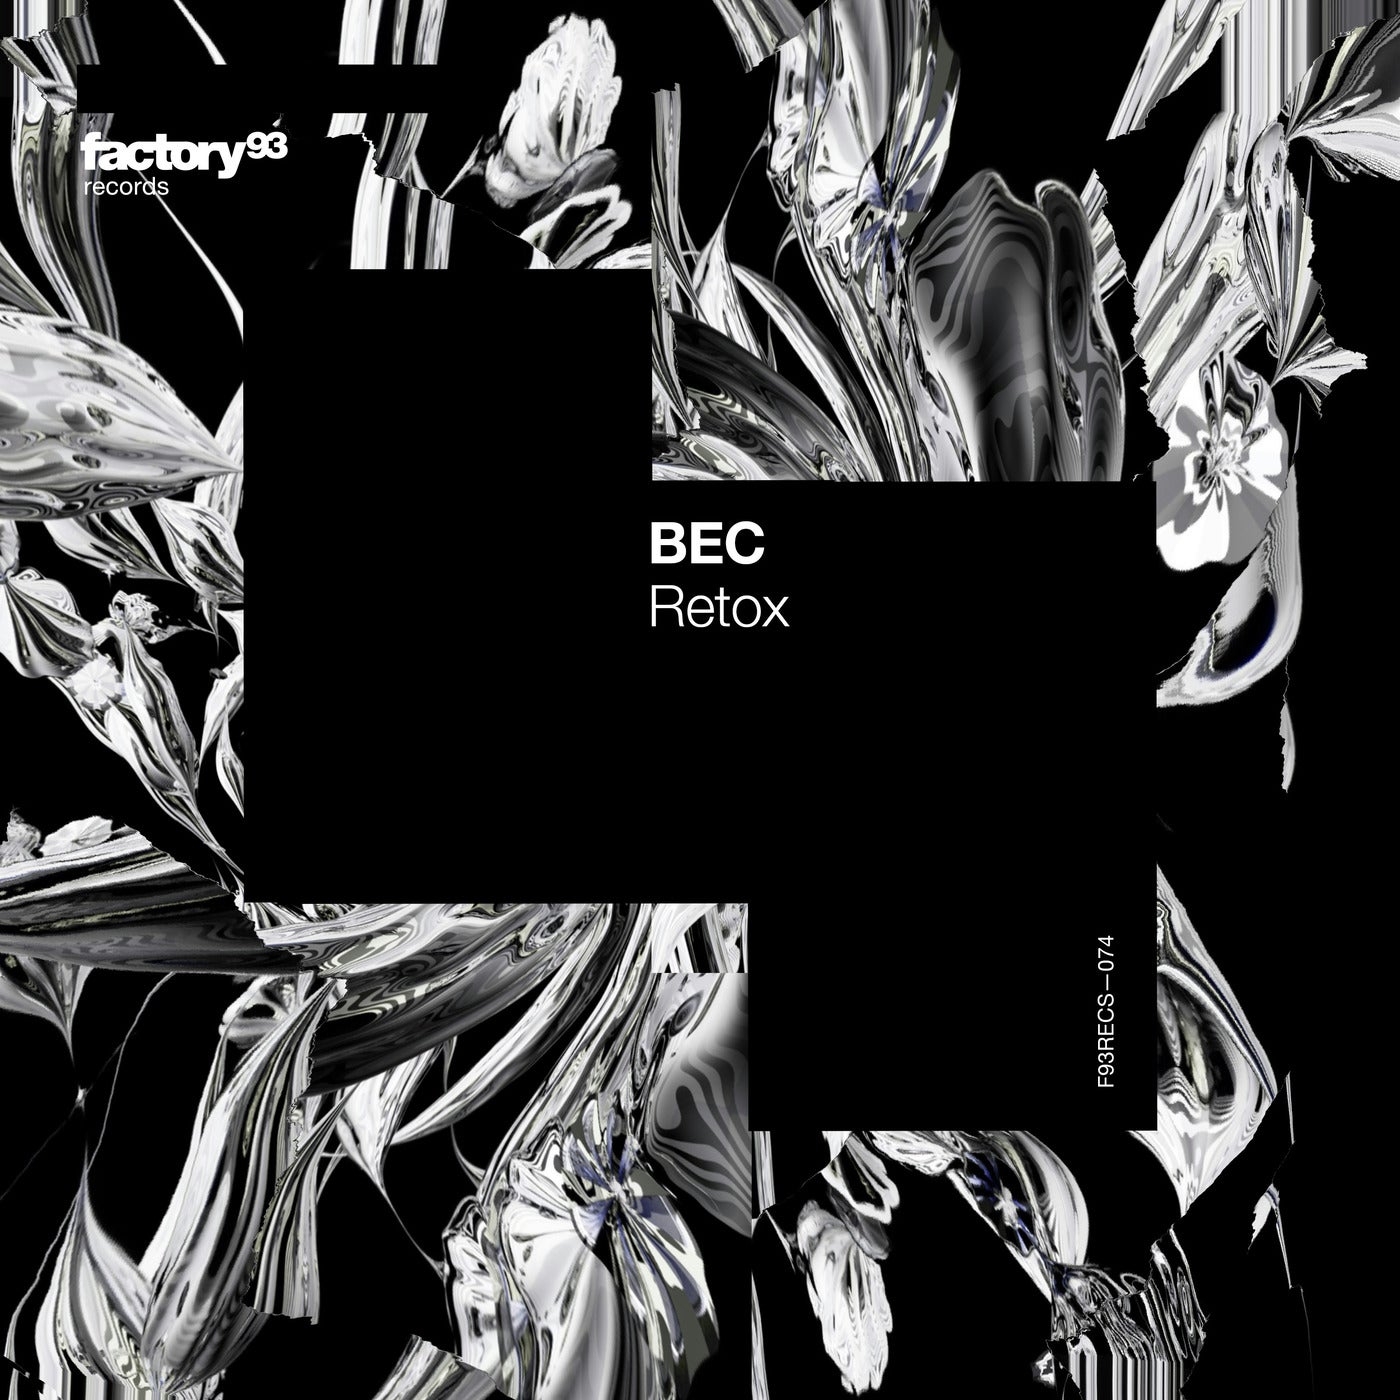 image cover: BEC - Retox on Factory 93 Records